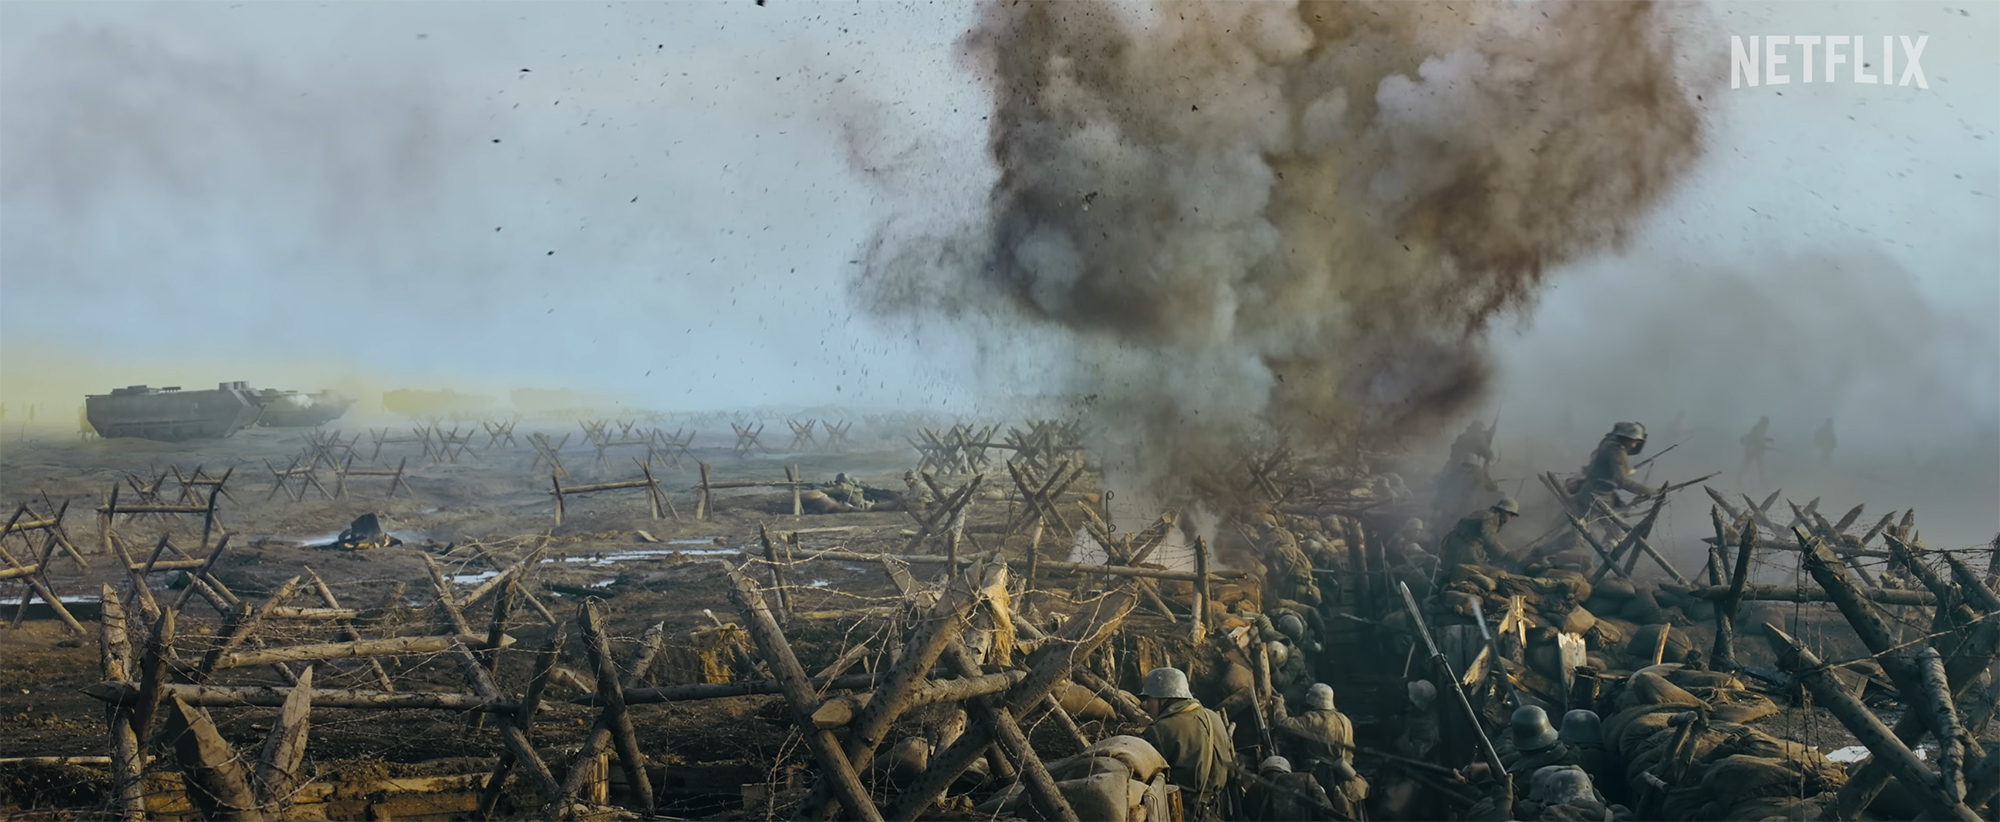 Film still of an explosion going off in a landscape of barbed wire and trench reinforcements